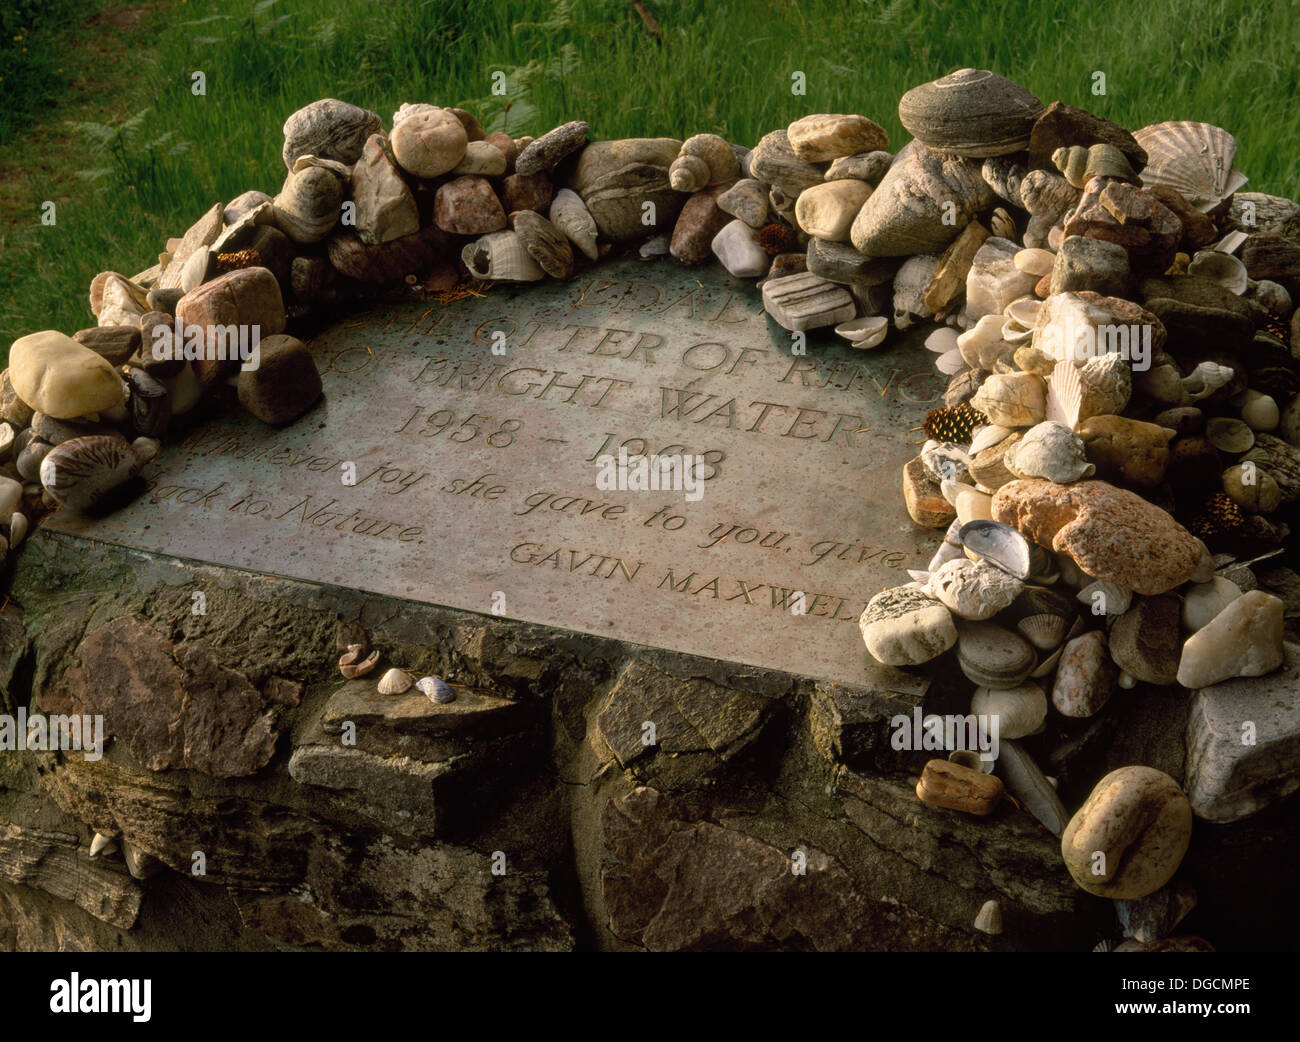 Memorial to the otter Edal beside the river at Sandaig, Glenelg, Scotland, Gavin Maxwell's 'Camusfearna' setting of the book Ring of Bright Water. Stock Photo